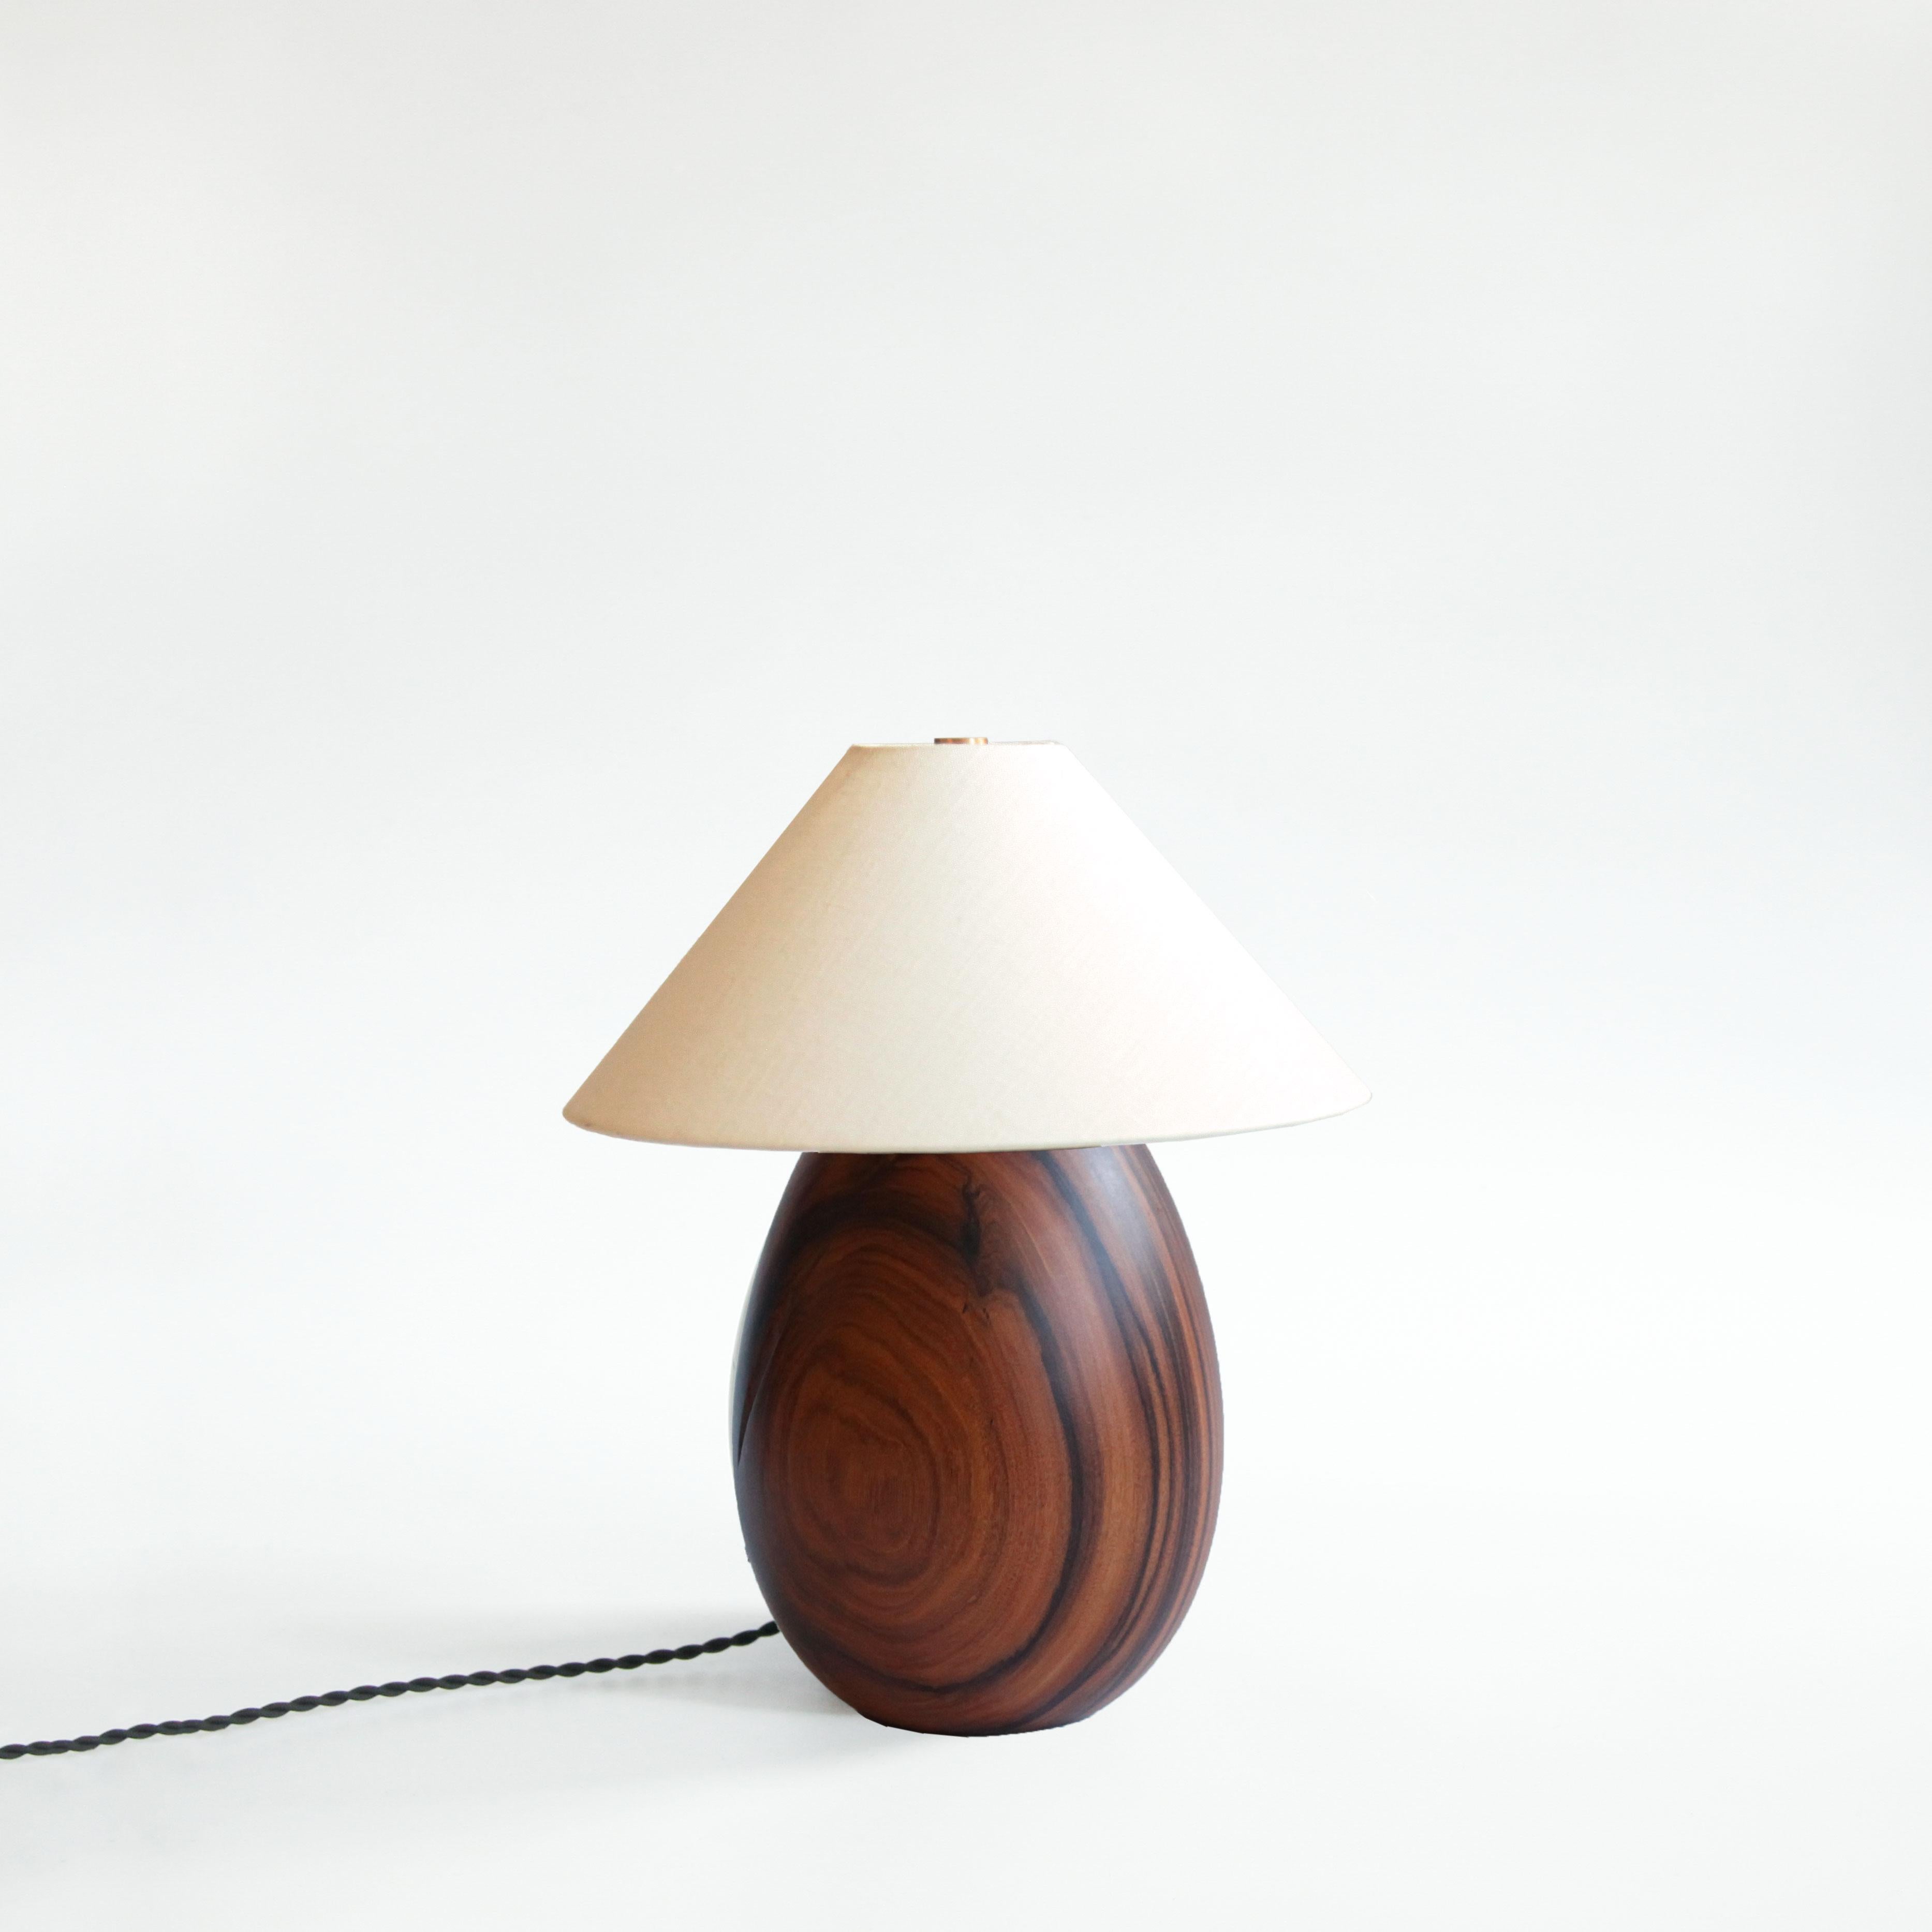 The Árbol collection is an embrace of tropical modernism; each lamp is composed of salvaged tropical hardwoods from the Bolivian city of Santa Cruz, where trees that are felled by natural causes—or for construction—are rescued by our team. A blend